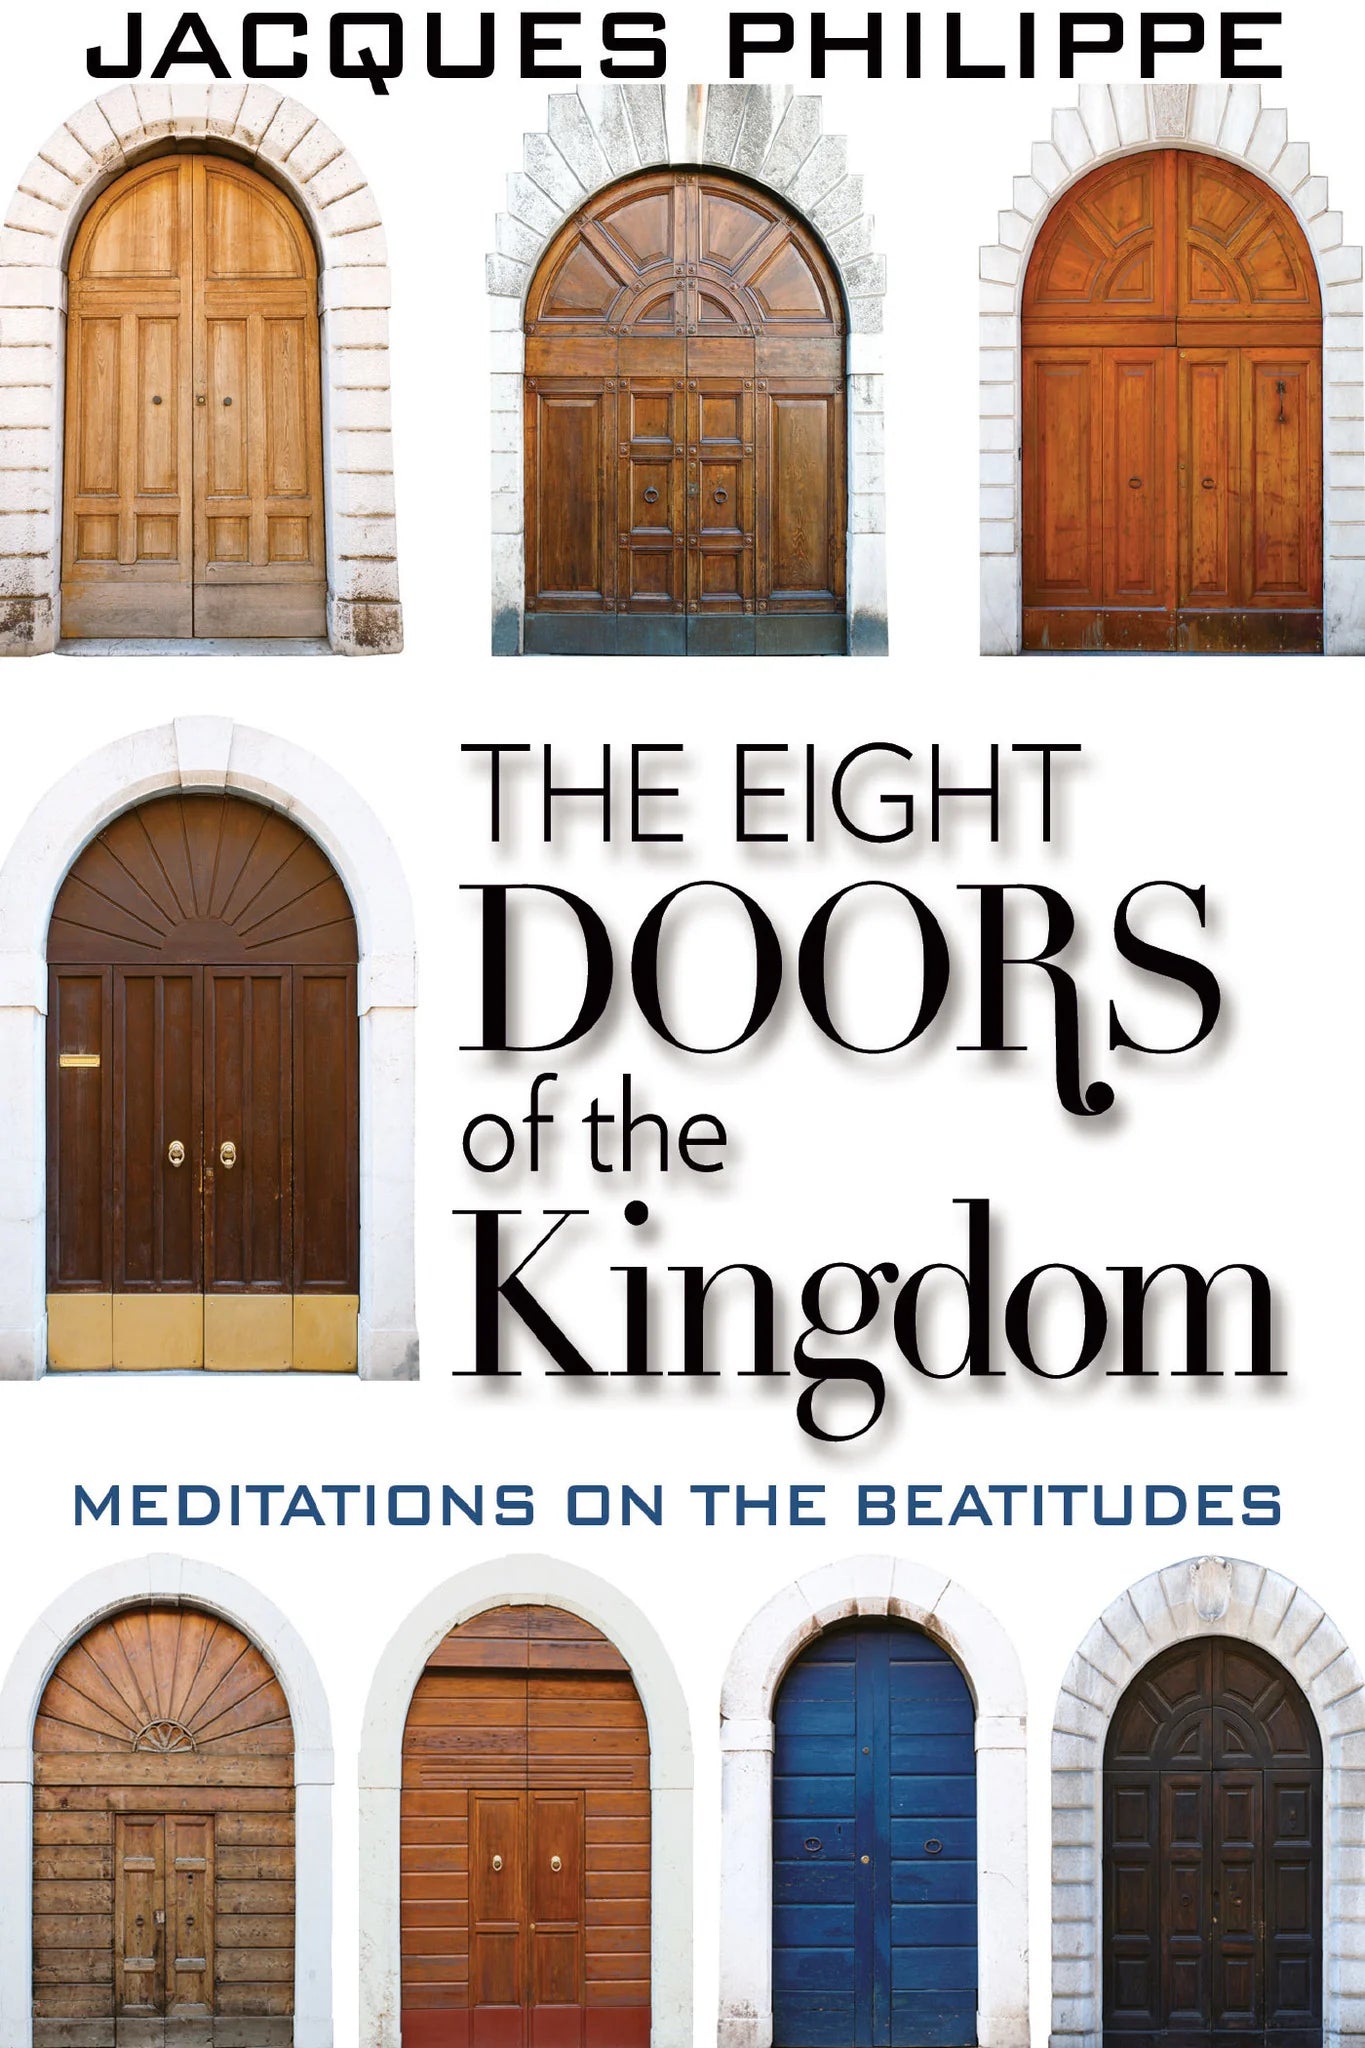 The Eight Doors of the Kingdom: Meditations on the Beatitudes